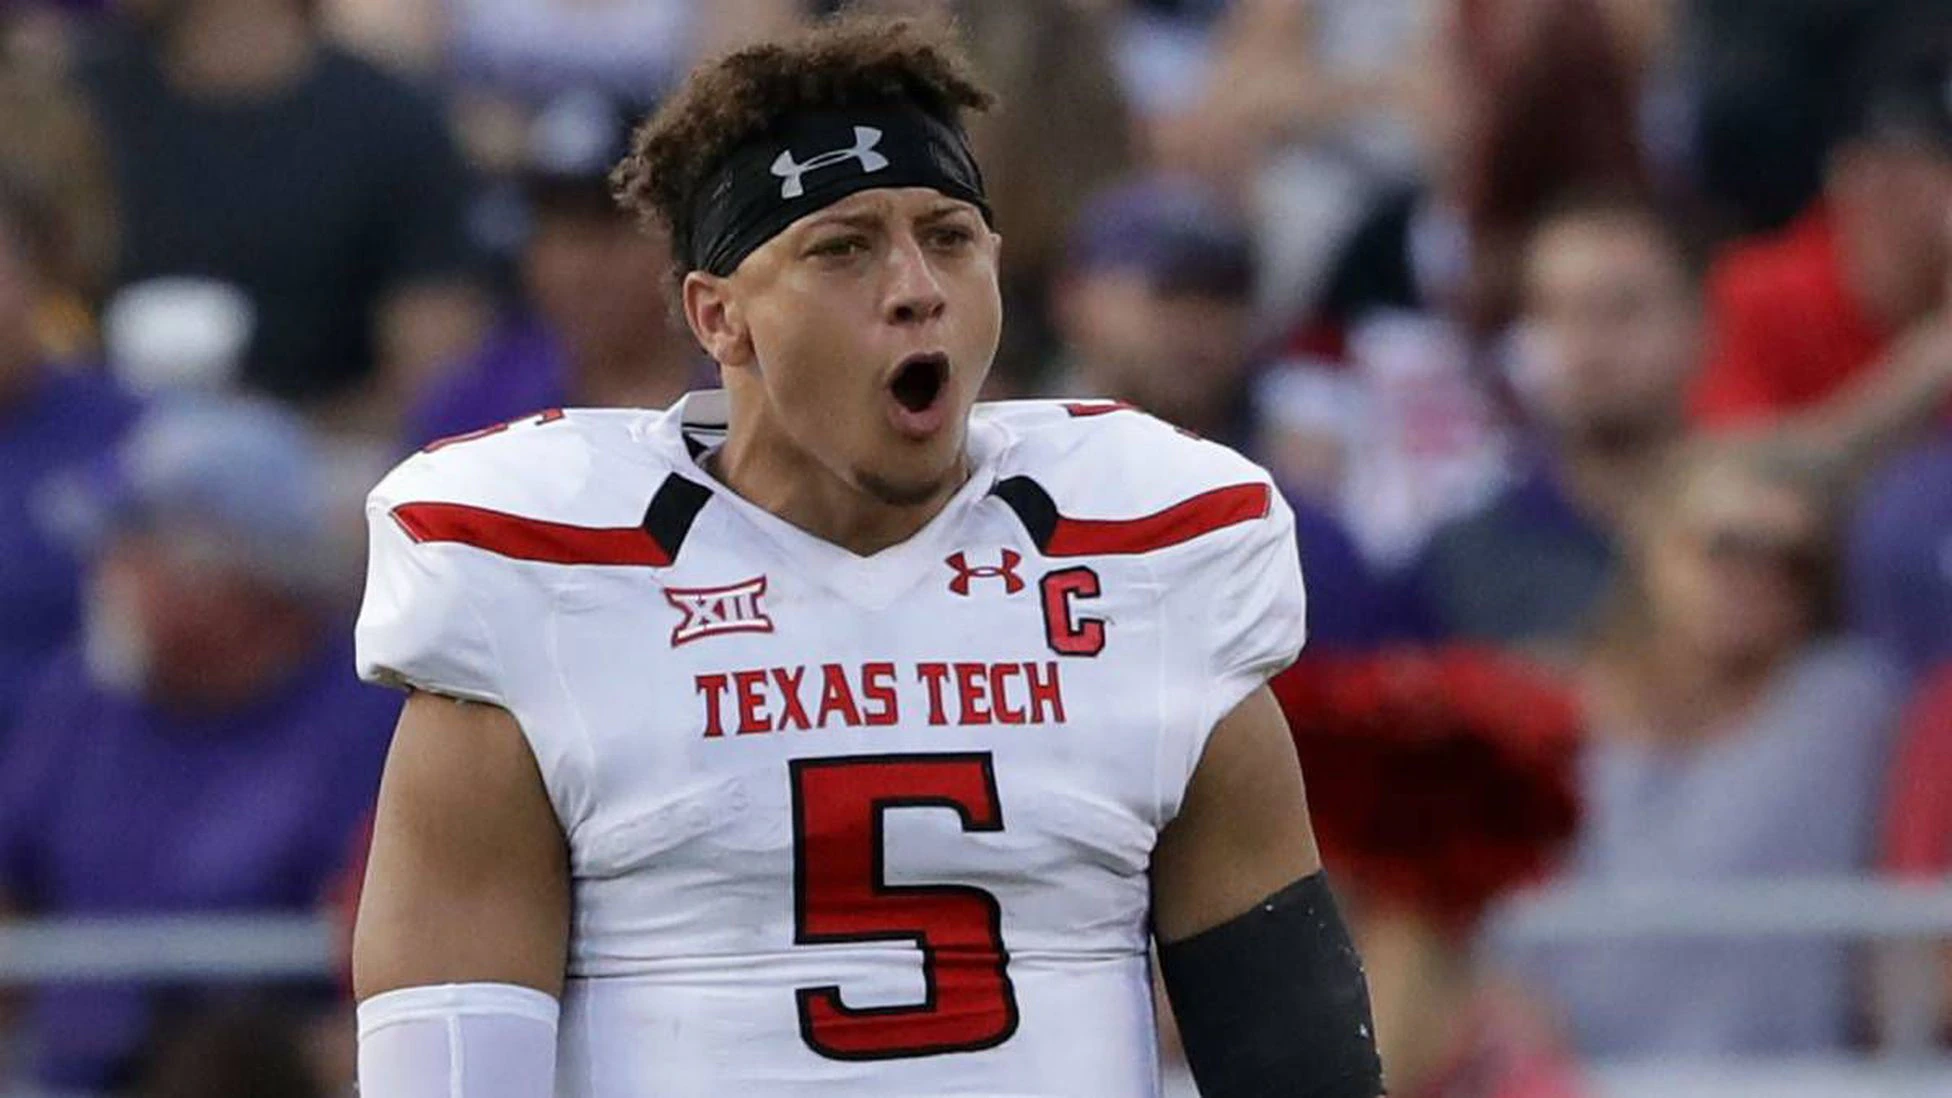 What College did Patrick Mahomes Go to?